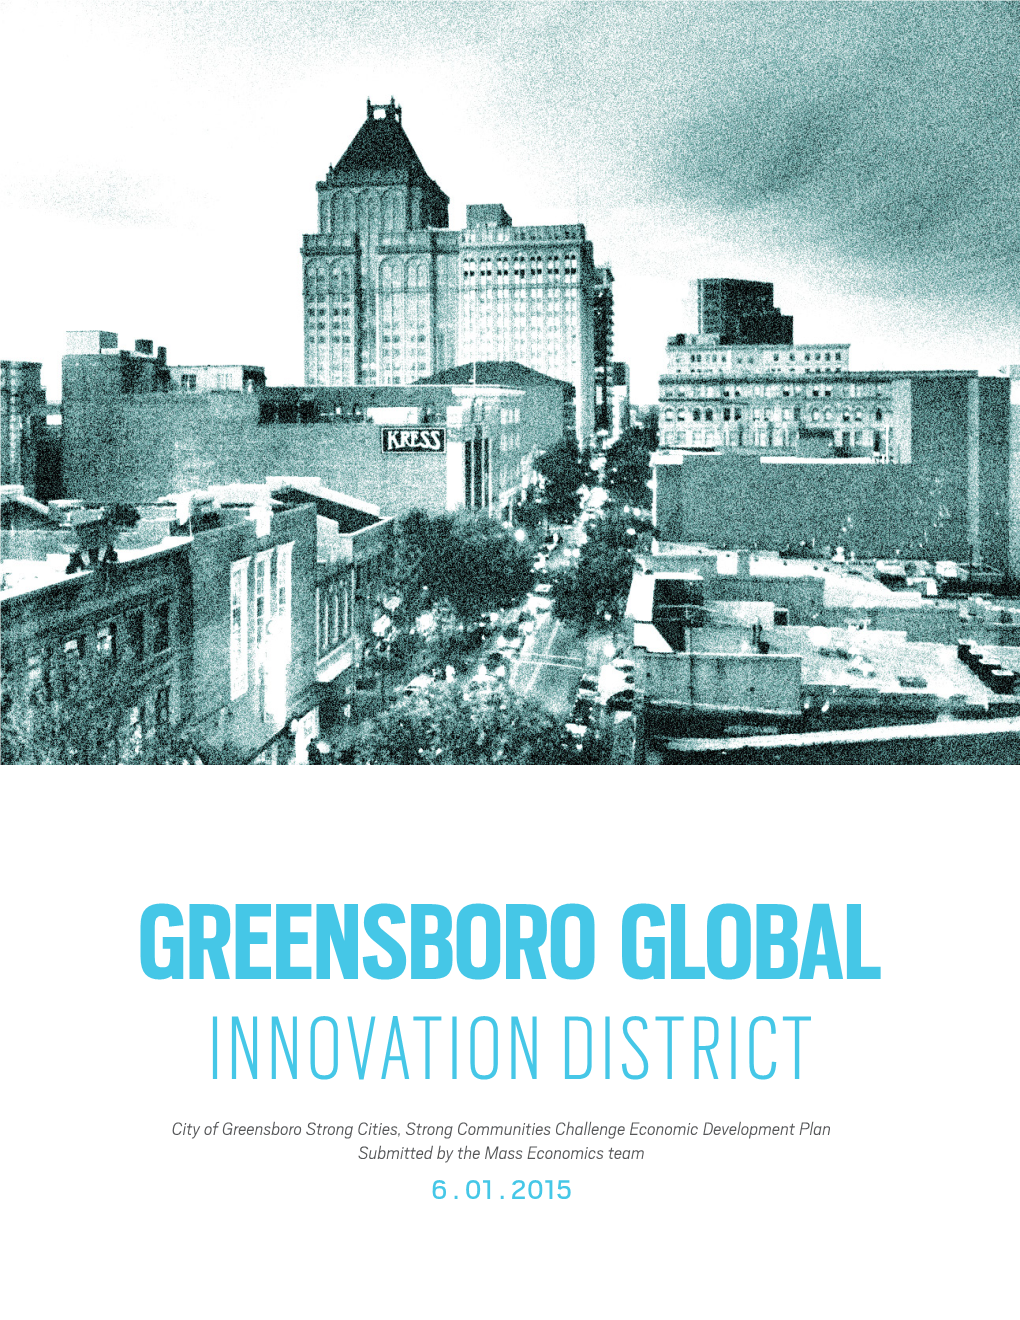 INNOVATION DISTRICT City of Greensboro Strong Cities, Strong Communities Challenge Economic Development Plan Submitted by the Mass Economics Team 6